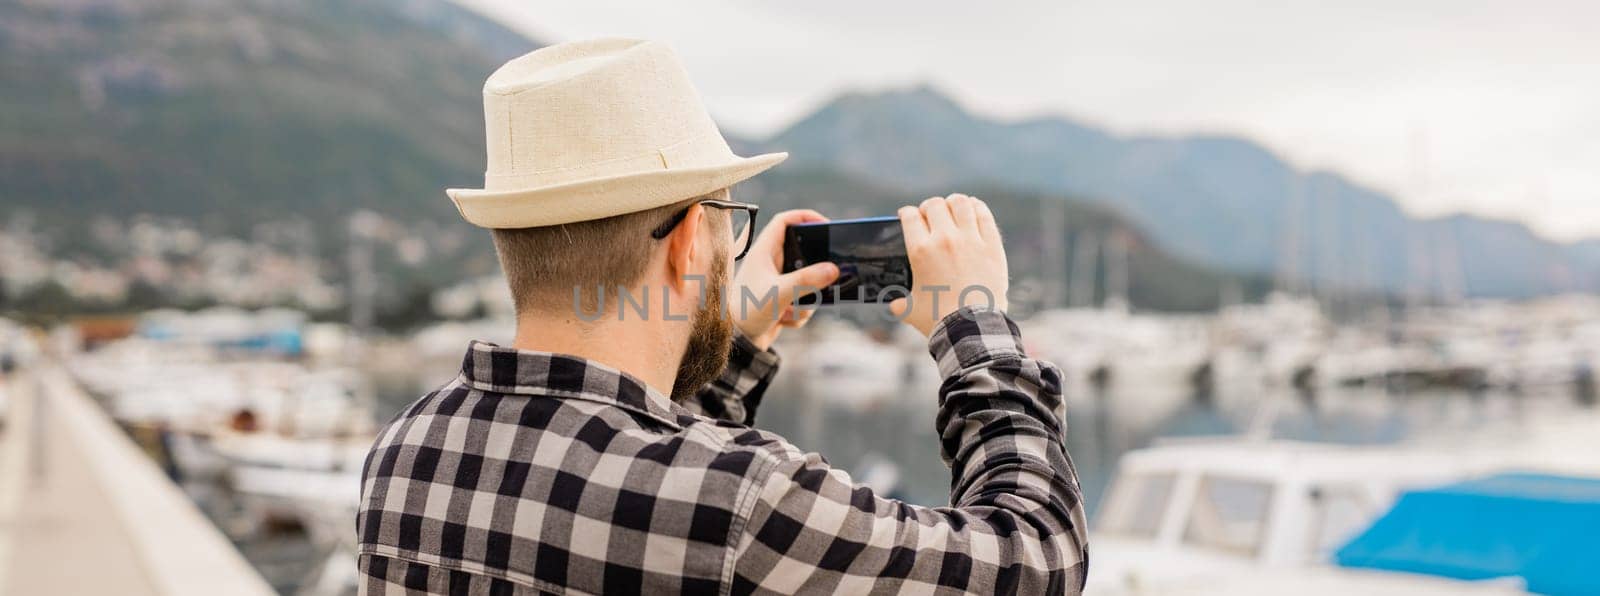 Traveller man taking pictures of luxury yachts marine during sunny day - travel and summer concept.